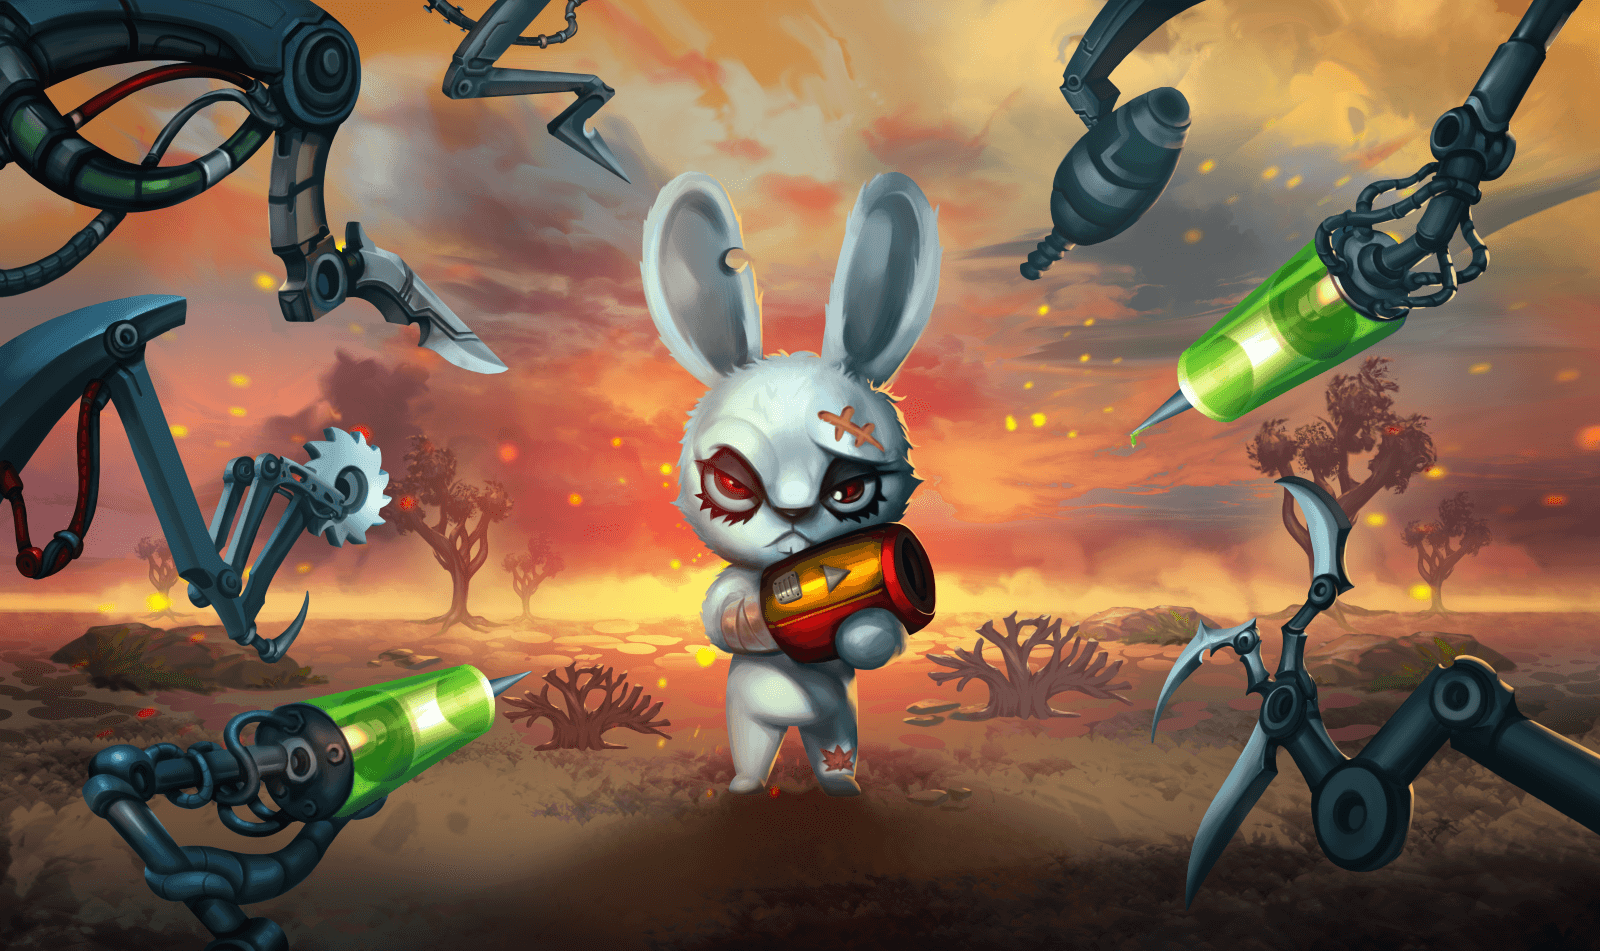 PETA-owned image of Bunny Raiders poster from https://petafoundation.sharepoint.com/sites/MultimediaProjectsTeam/Shared%20Documents/Forms/AllItems.aspx?ga=1&id=%2Fsites%2FMultimediaProjectsTeam%2FShared%20Documents%2FGames%2FBunny%20Raiders%2FVisuals%20and%20Graphics%2FPoster%2Ffinal%20game%20poster%2Epng&viewid=b1df99c4%2D94c2%2D4dc5%2D8418%2Dca866a518cda&parent=%2Fsites%2FMultimediaProjectsTeam%2FShared%20Documents%2FGames%2FBunny%20Raiders%2FVisuals%20and%20Graphics%2FPoster